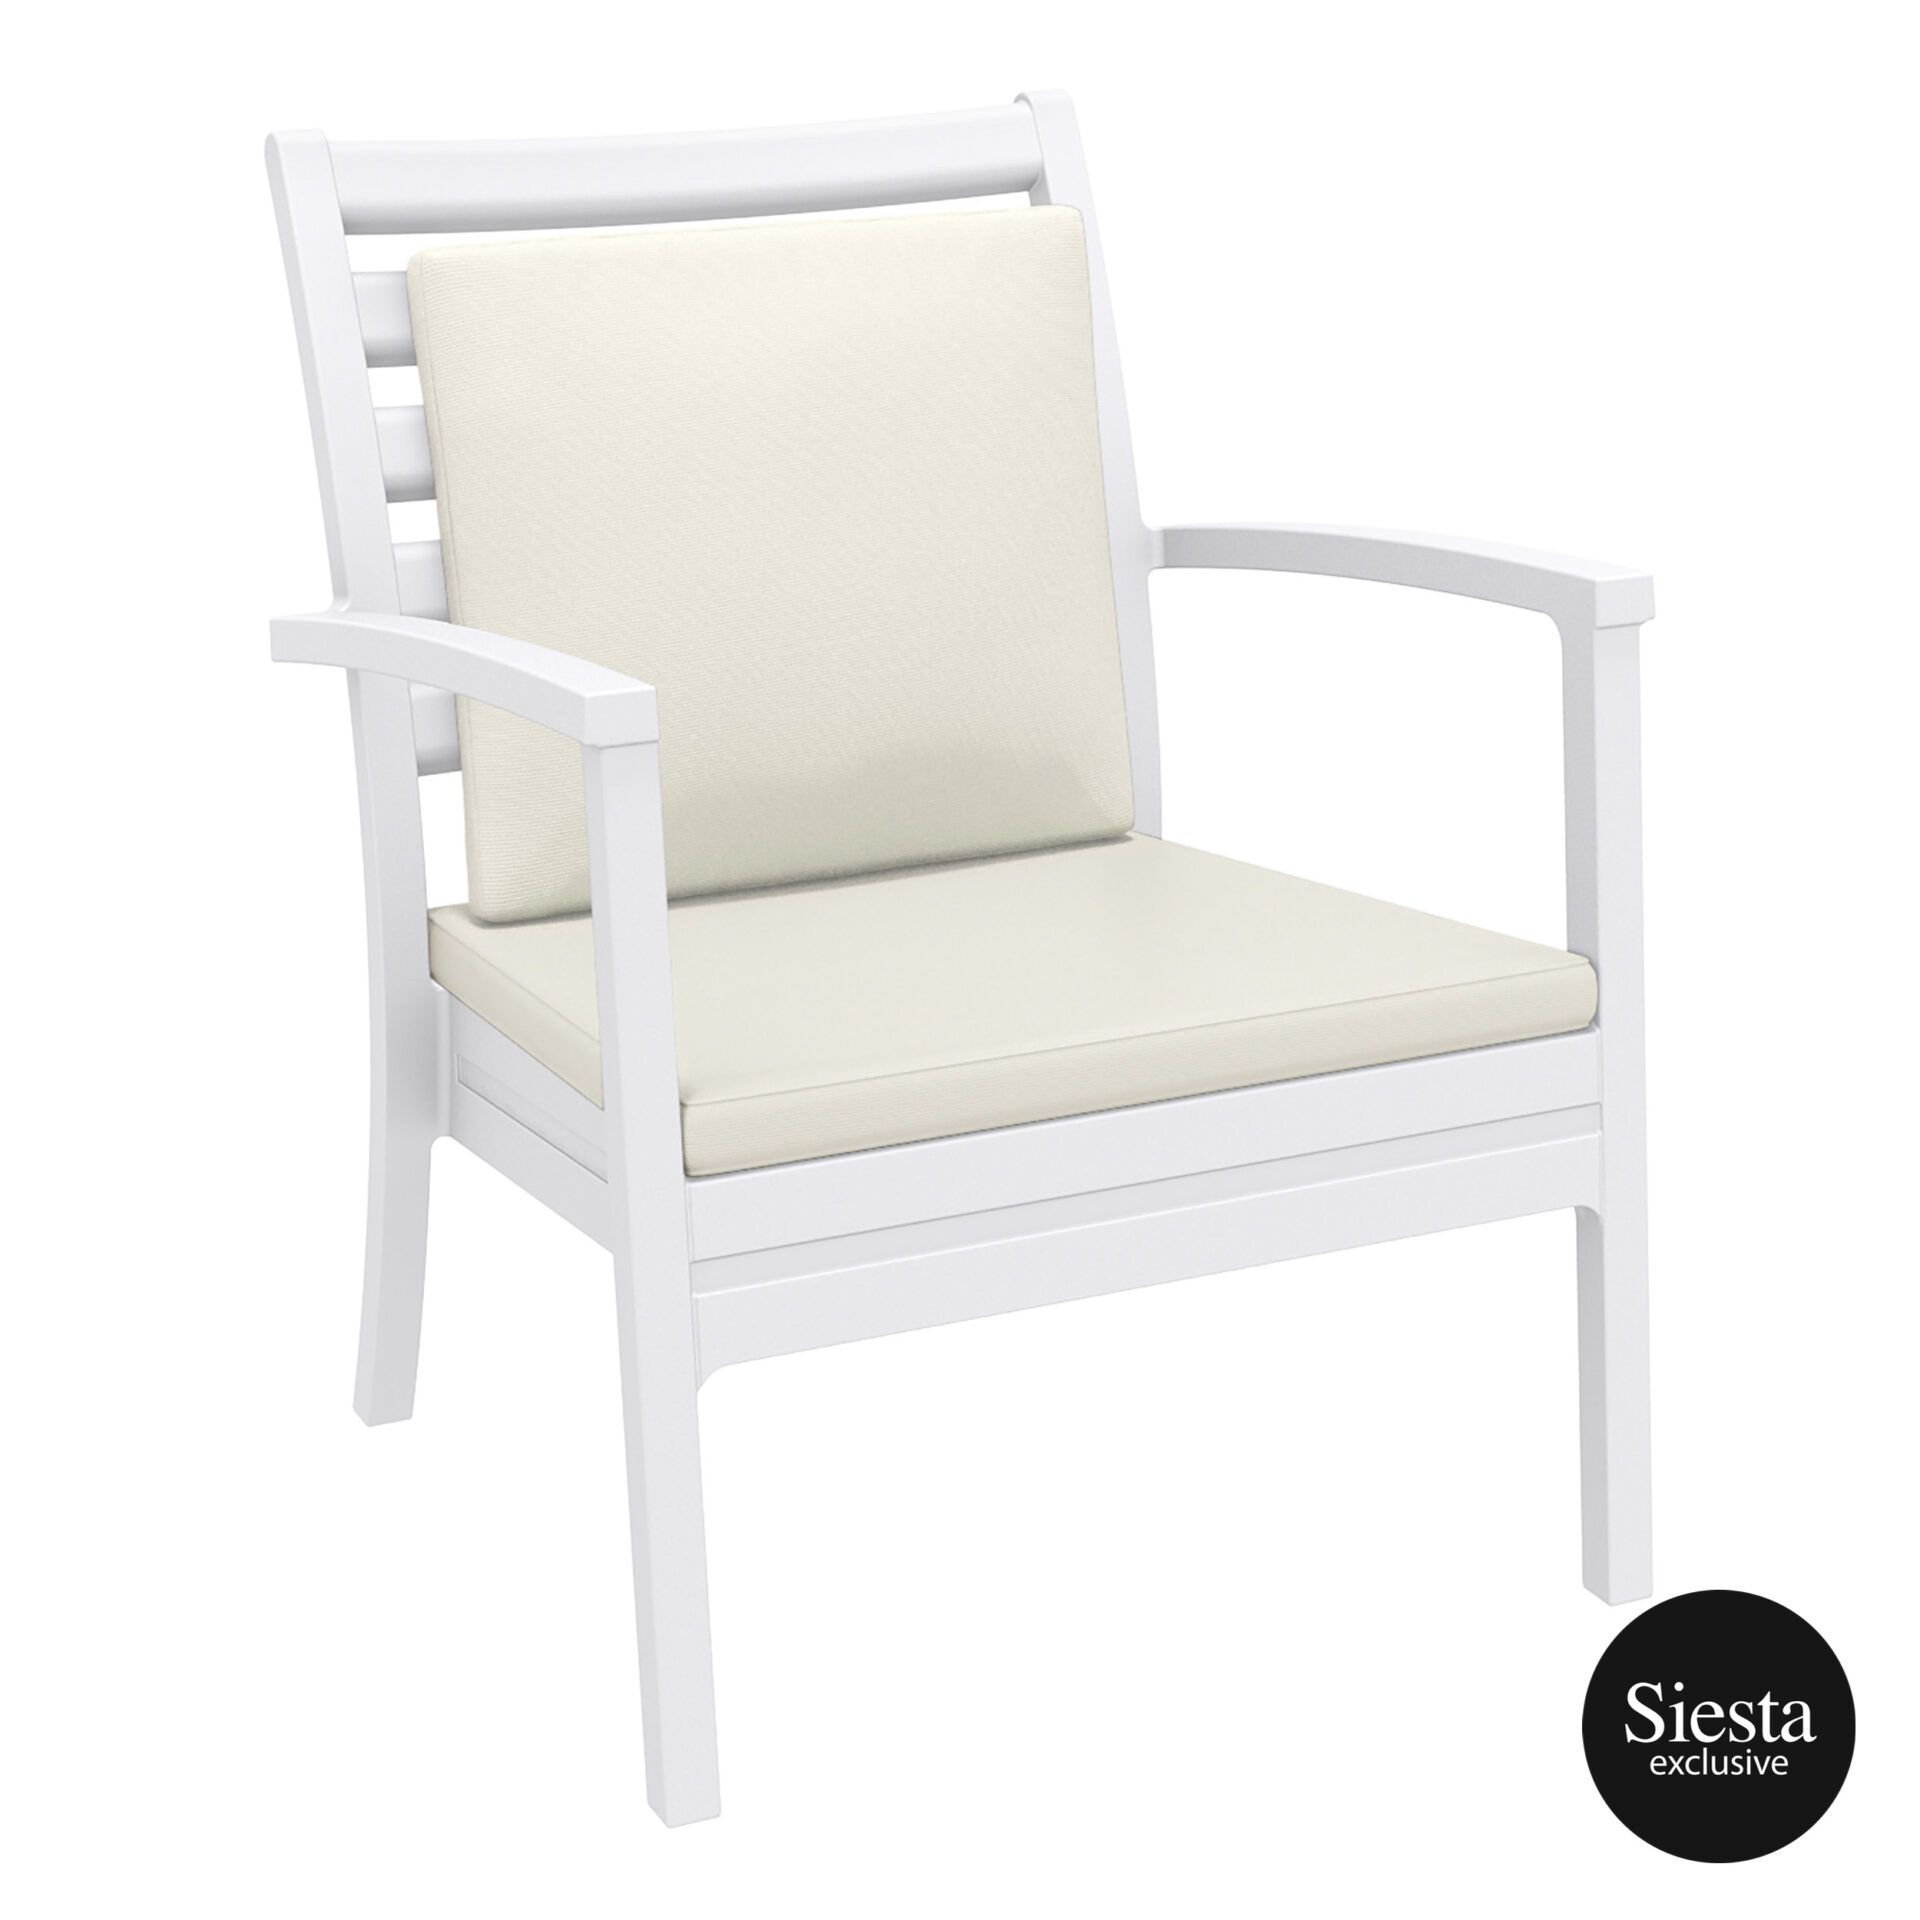 Artemis XL Armchair - White with Beige Seat and Back Cushion